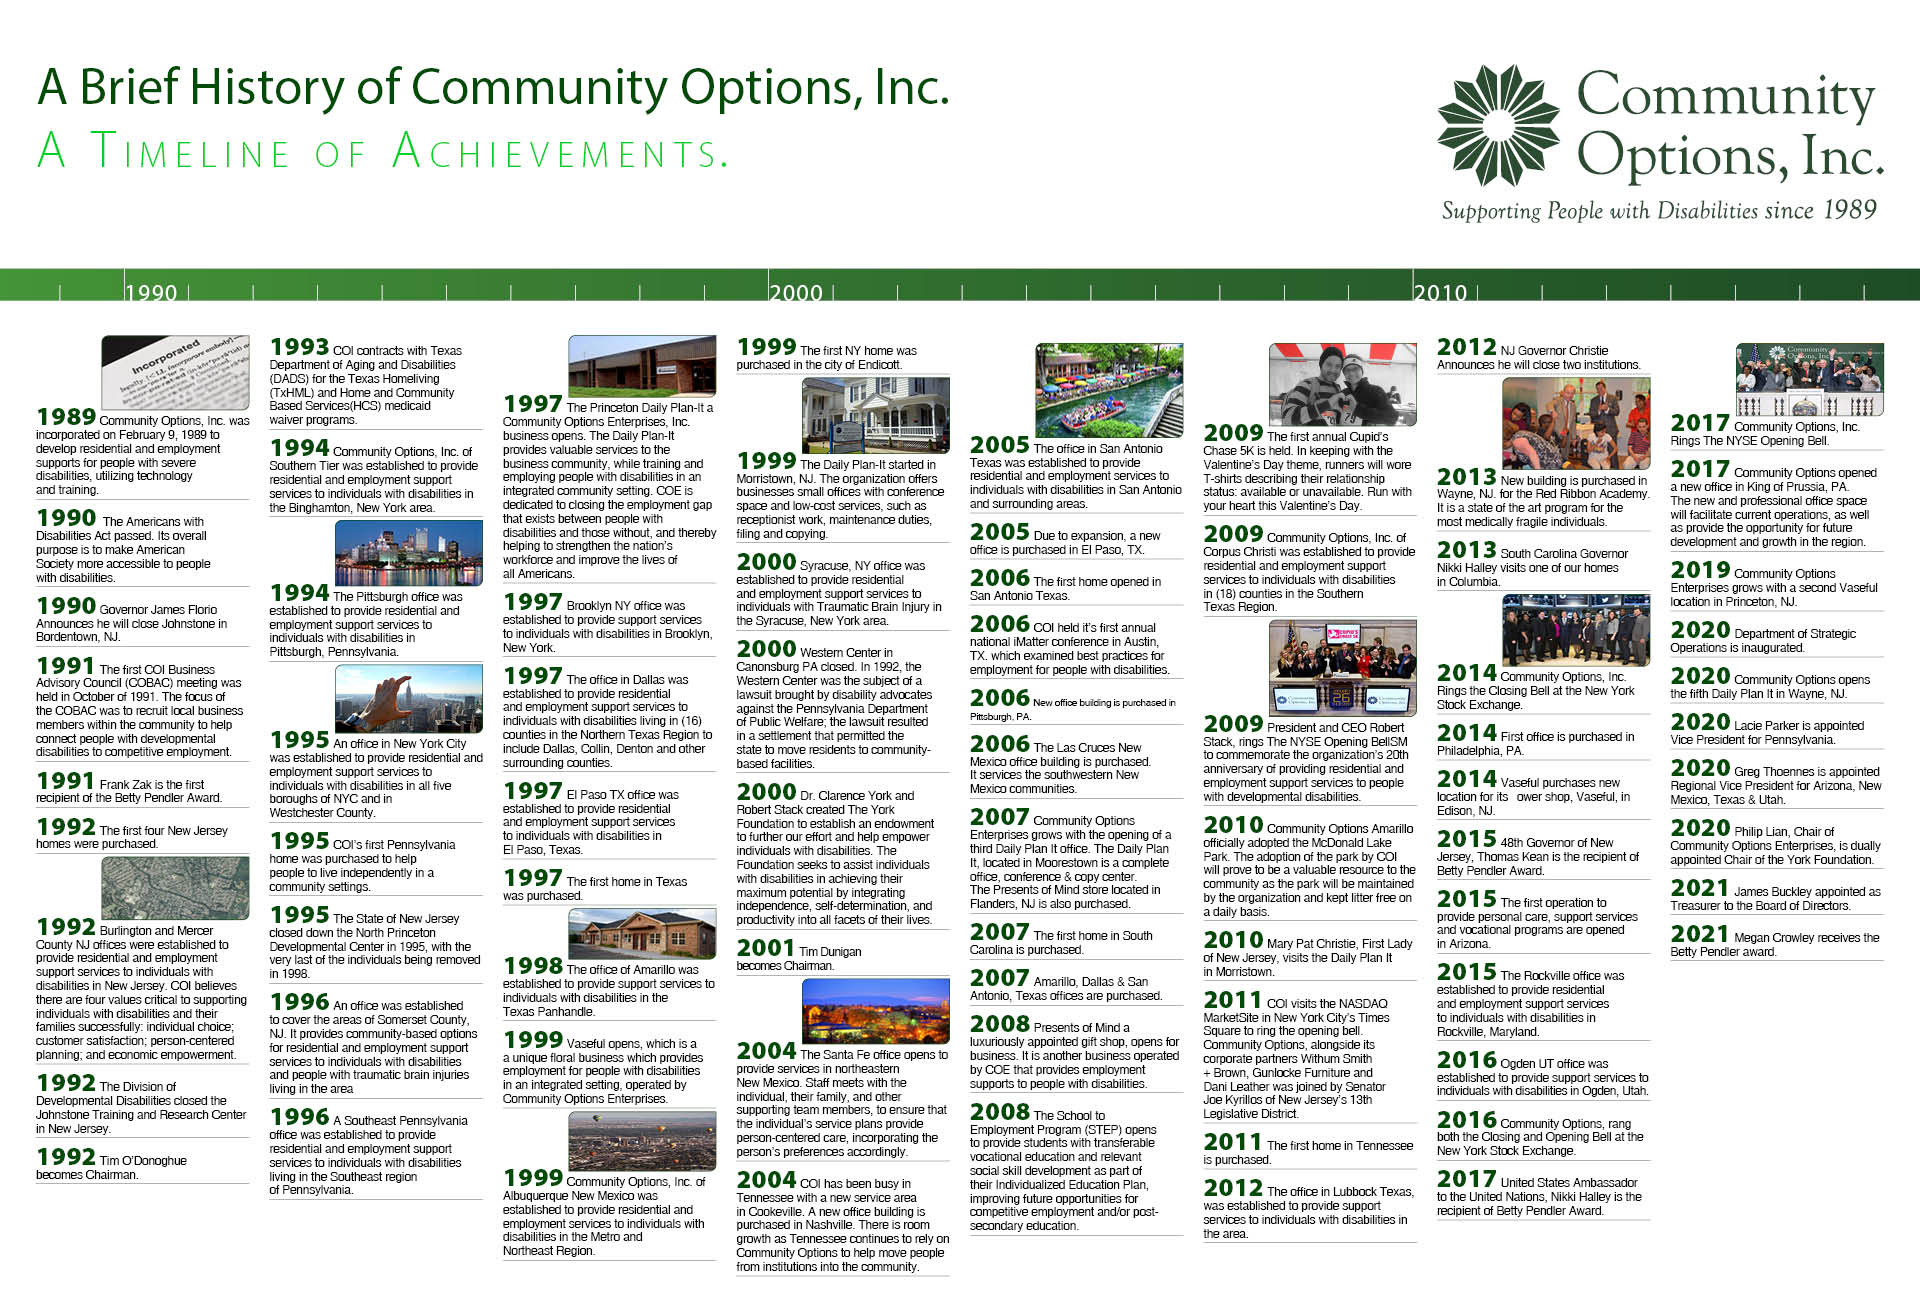 A Brief History of Community Options, Inc. A Timeline of Achievements. Revised November 15, 2021